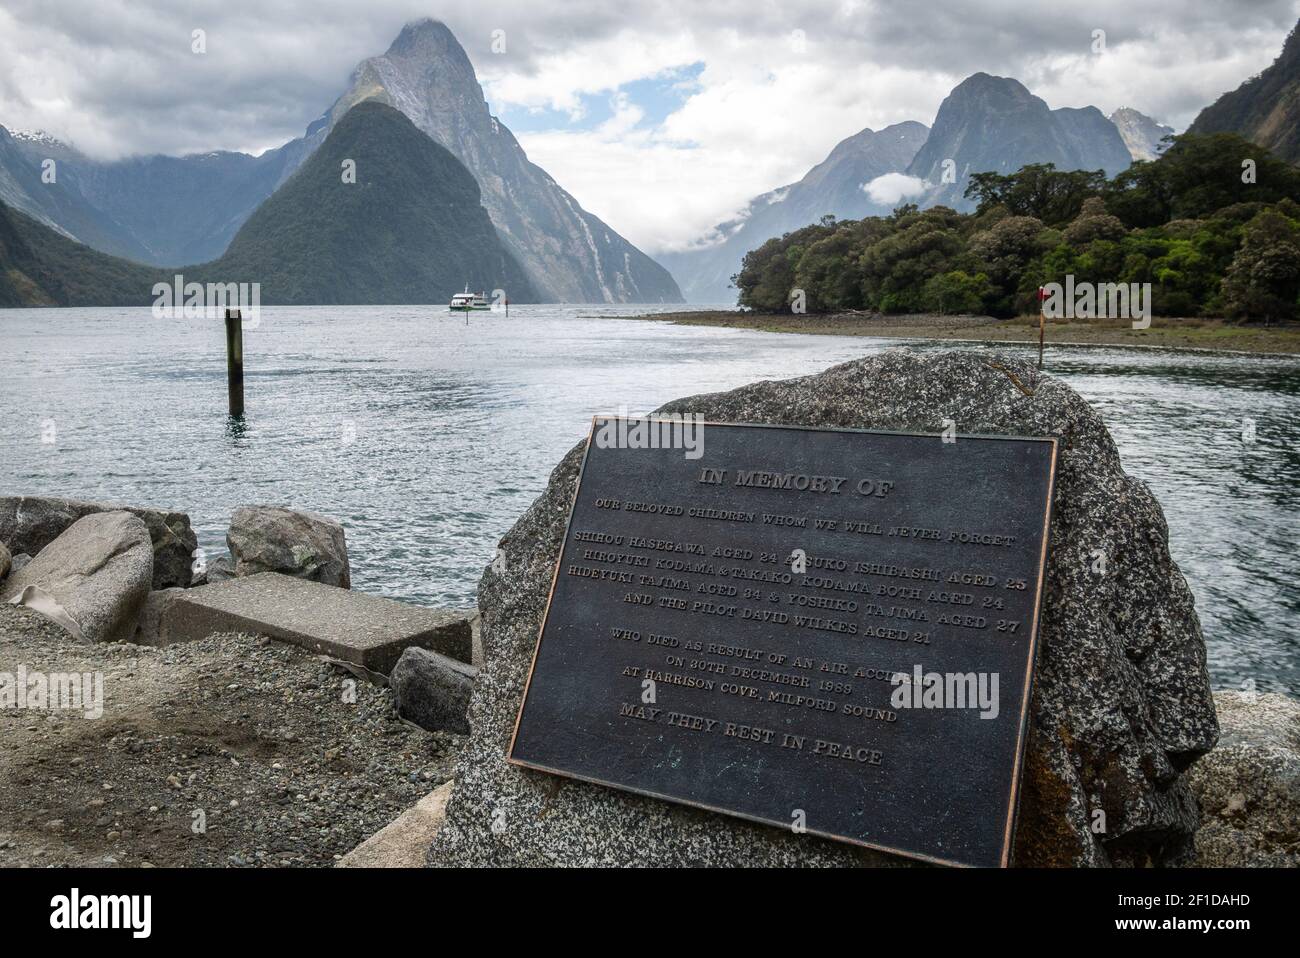 View on fjord with impressive mountains in backdrop and monument in foreground. Photo taken in Milford Sound, Fiordland National Park, New Zealand Stock Photo